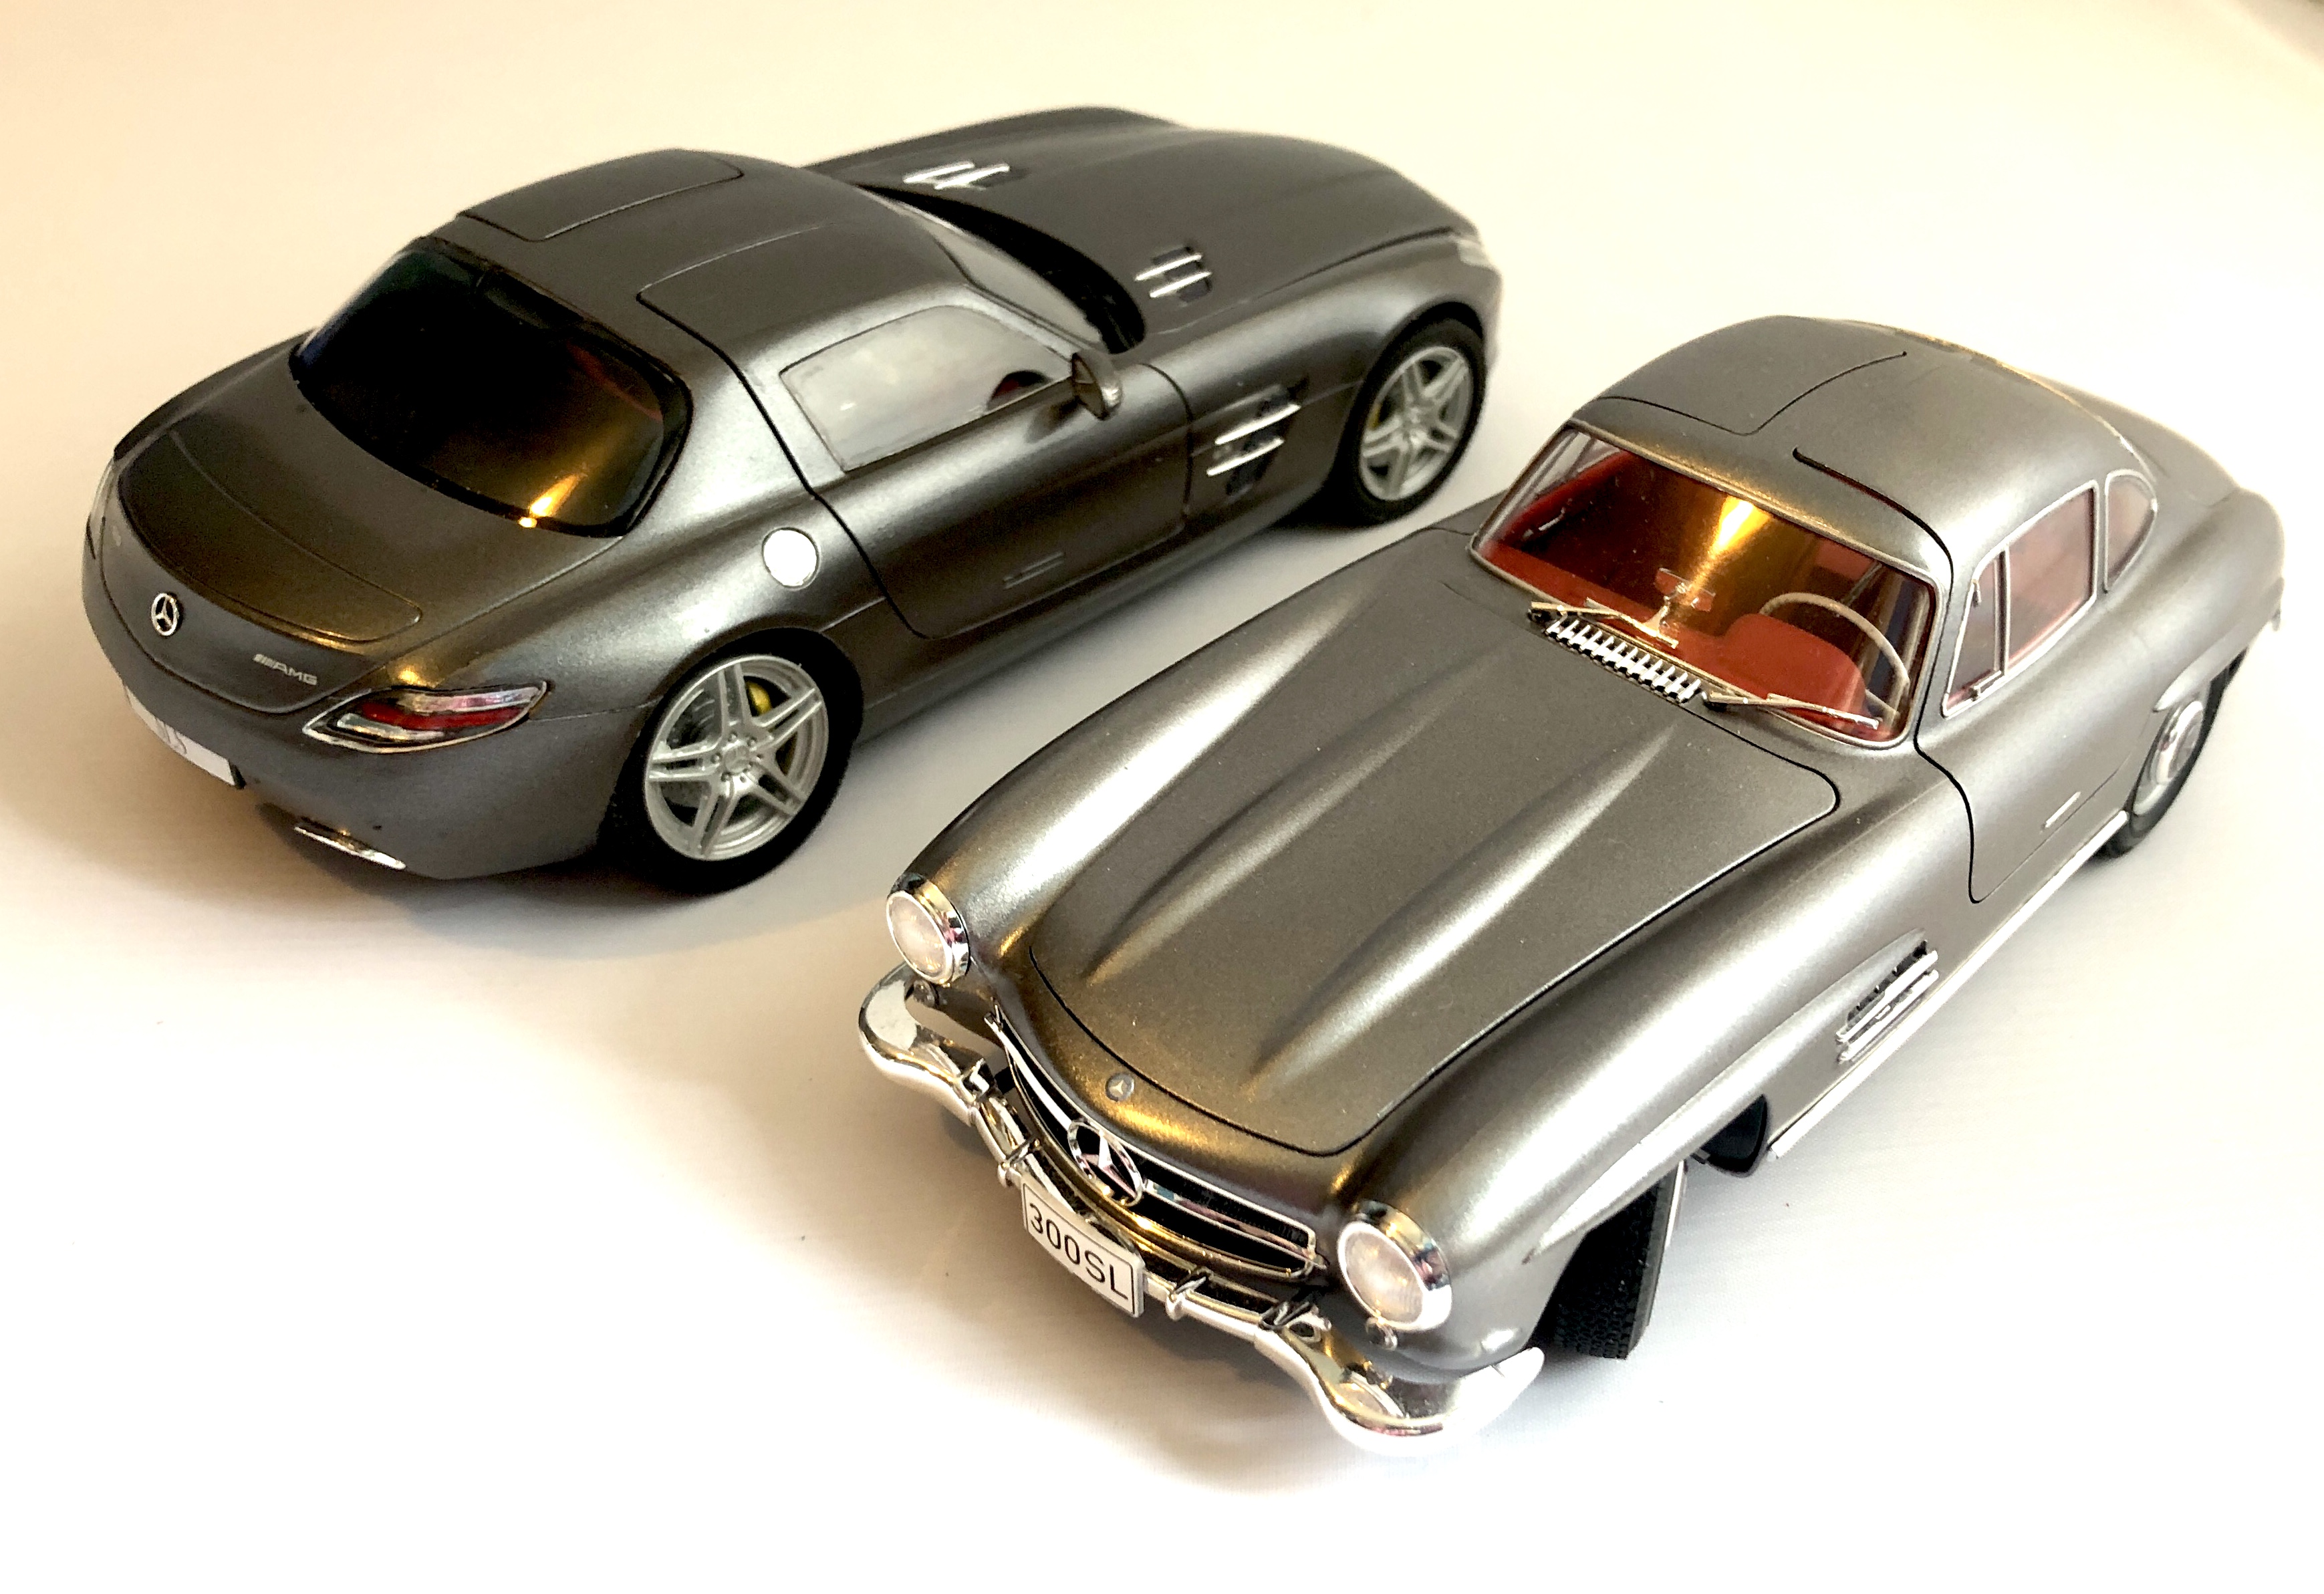 1/24 Mercedes 300 SL Gullwing by Tamiya - Page 4 - Scale Models - PistonHeads